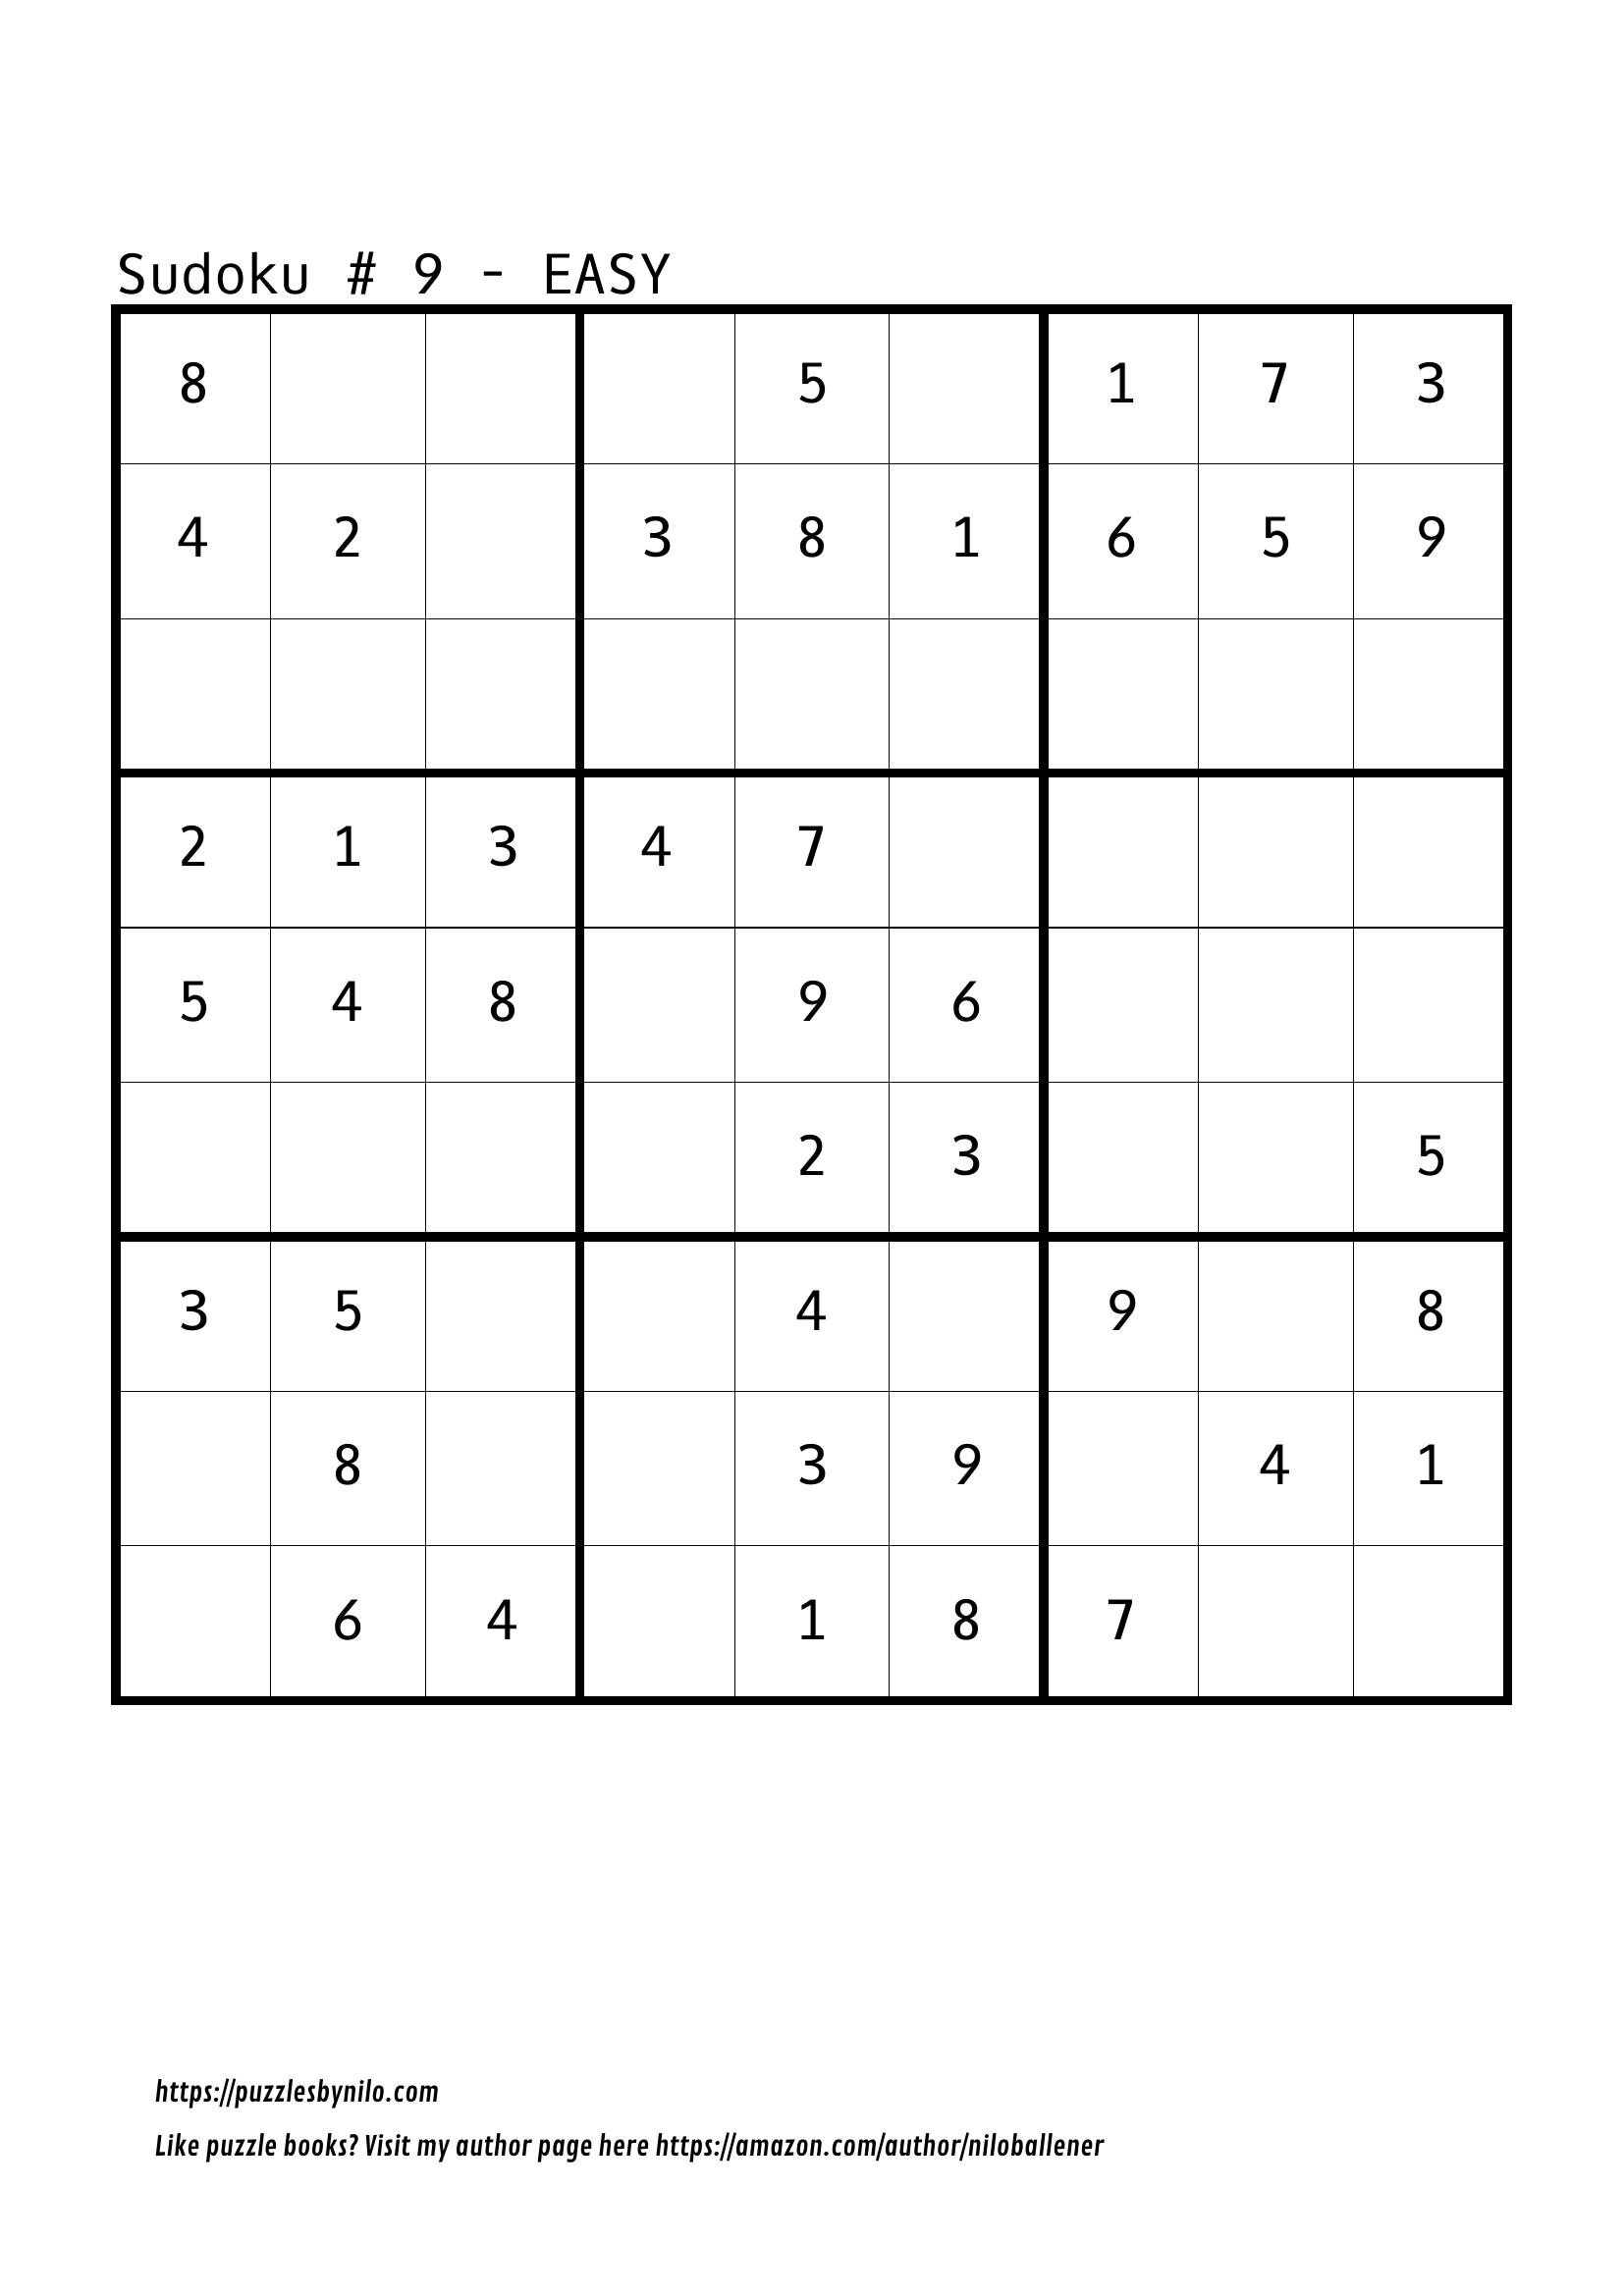 free downloadable sudoku puzzle easy 9 puzzles by nilo